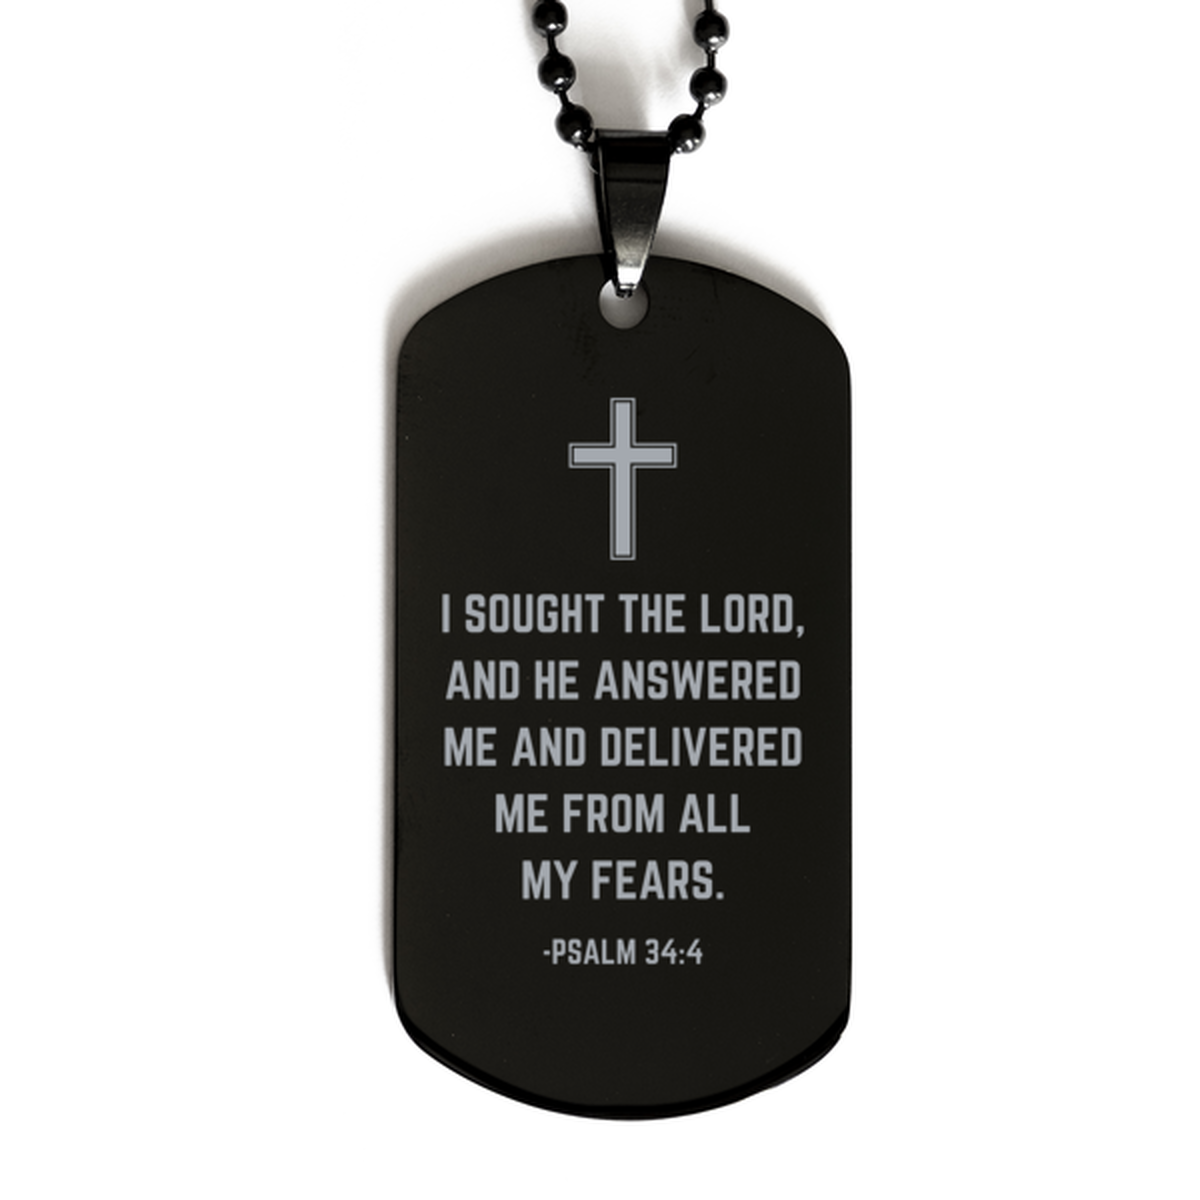 Baptism Gifts For Teenage Boys Girls, Christian Bible Verse Black Dog Tag, I sought the Lord, Confirmation Gifts, Bible Verse Necklace for Son, Godson, Grandson, Nephew